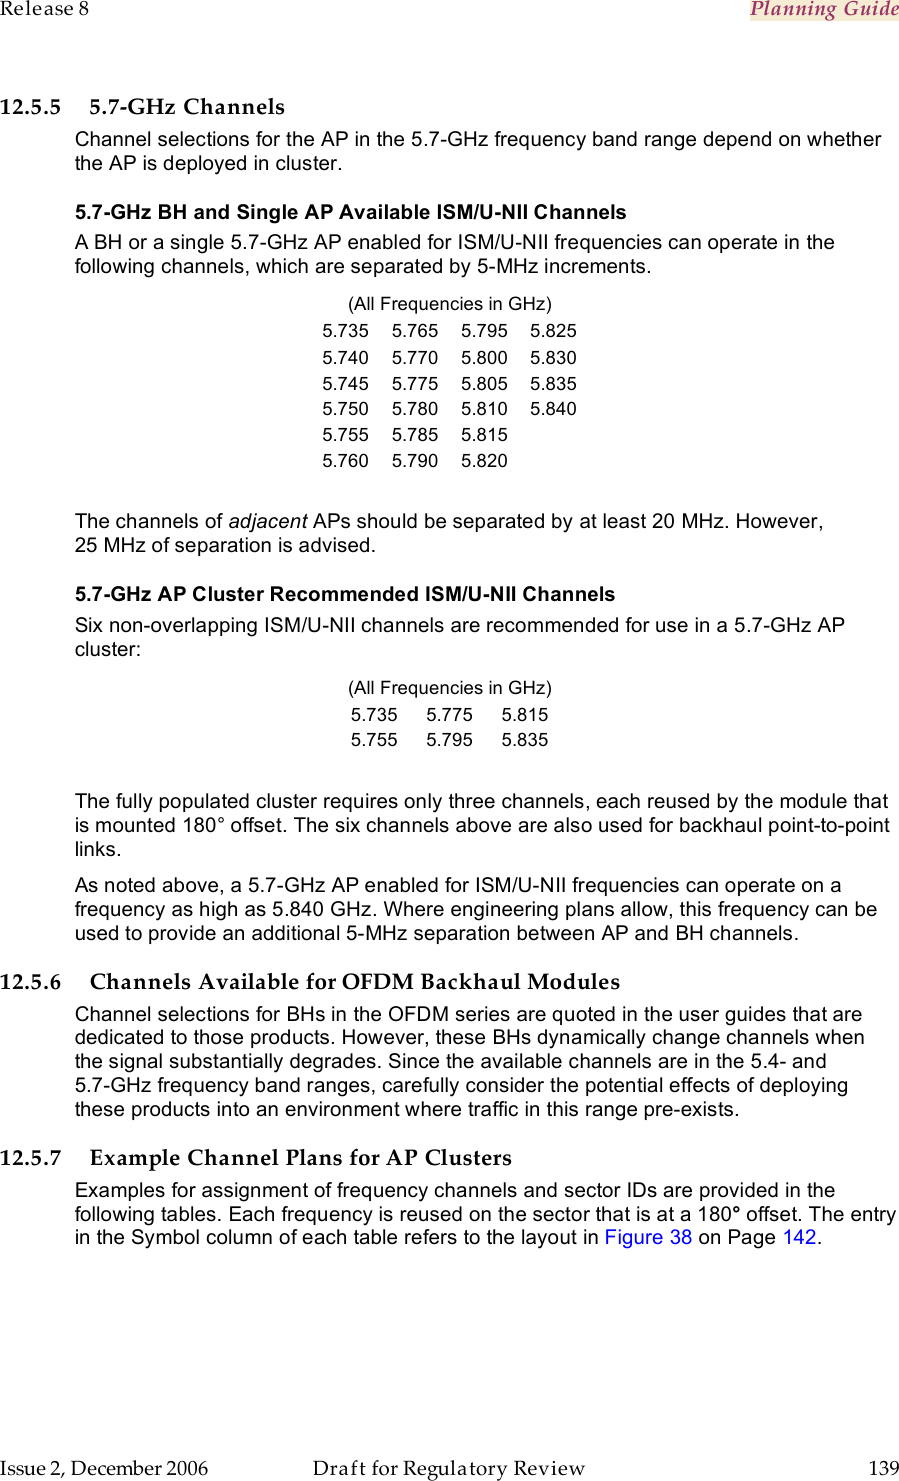 Release 8    Planning Guide                  March 200                  Through Software Release 6.   Issue 2, December 2006  Draft for Regulatory Review  139     12.5.5 5.7-GHz Channels Channel selections for the AP in the 5.7-GHz frequency band range depend on whether the AP is deployed in cluster.  5.7-GHz BH and Single AP Available ISM/U-NII Channels A BH or a single 5.7-GHz AP enabled for ISM/U-NII frequencies can operate in the following channels, which are separated by 5-MHz increments. (All Frequencies in GHz) 5.735 5.765 5.795 5.825 5.740 5.770 5.800 5.830 5.745 5.775 5.805 5.835 5.750 5.780 5.810 5.840 5.755 5.785 5.815  5.760 5.790 5.820   The channels of adjacent APs should be separated by at least 20 MHz. However,  25 MHz of separation is advised. 5.7-GHz AP Cluster Recommended ISM/U-NII Channels Six non-overlapping ISM/U-NII channels are recommended for use in a 5.7-GHz AP cluster: (All Frequencies in GHz) 5.735 5.775 5.815 5.755 5.795 5.835  The fully populated cluster requires only three channels, each reused by the module that is mounted 180° offset. The six channels above are also used for backhaul point-to-point links. As noted above, a 5.7-GHz AP enabled for ISM/U-NII frequencies can operate on a frequency as high as 5.840 GHz. Where engineering plans allow, this frequency can be used to provide an additional 5-MHz separation between AP and BH channels. 12.5.6 Channels Available for OFDM Backhaul Modules Channel selections for BHs in the OFDM series are quoted in the user guides that are dedicated to those products. However, these BHs dynamically change channels when the signal substantially degrades. Since the available channels are in the 5.4- and  5.7-GHz frequency band ranges, carefully consider the potential effects of deploying these products into an environment where traffic in this range pre-exists. 12.5.7 Example Channel Plans for AP Clusters Examples for assignment of frequency channels and sector IDs are provided in the following tables. Each frequency is reused on the sector that is at a 180° offset. The entry in the Symbol column of each table refers to the layout in Figure 38 on Page 142.  